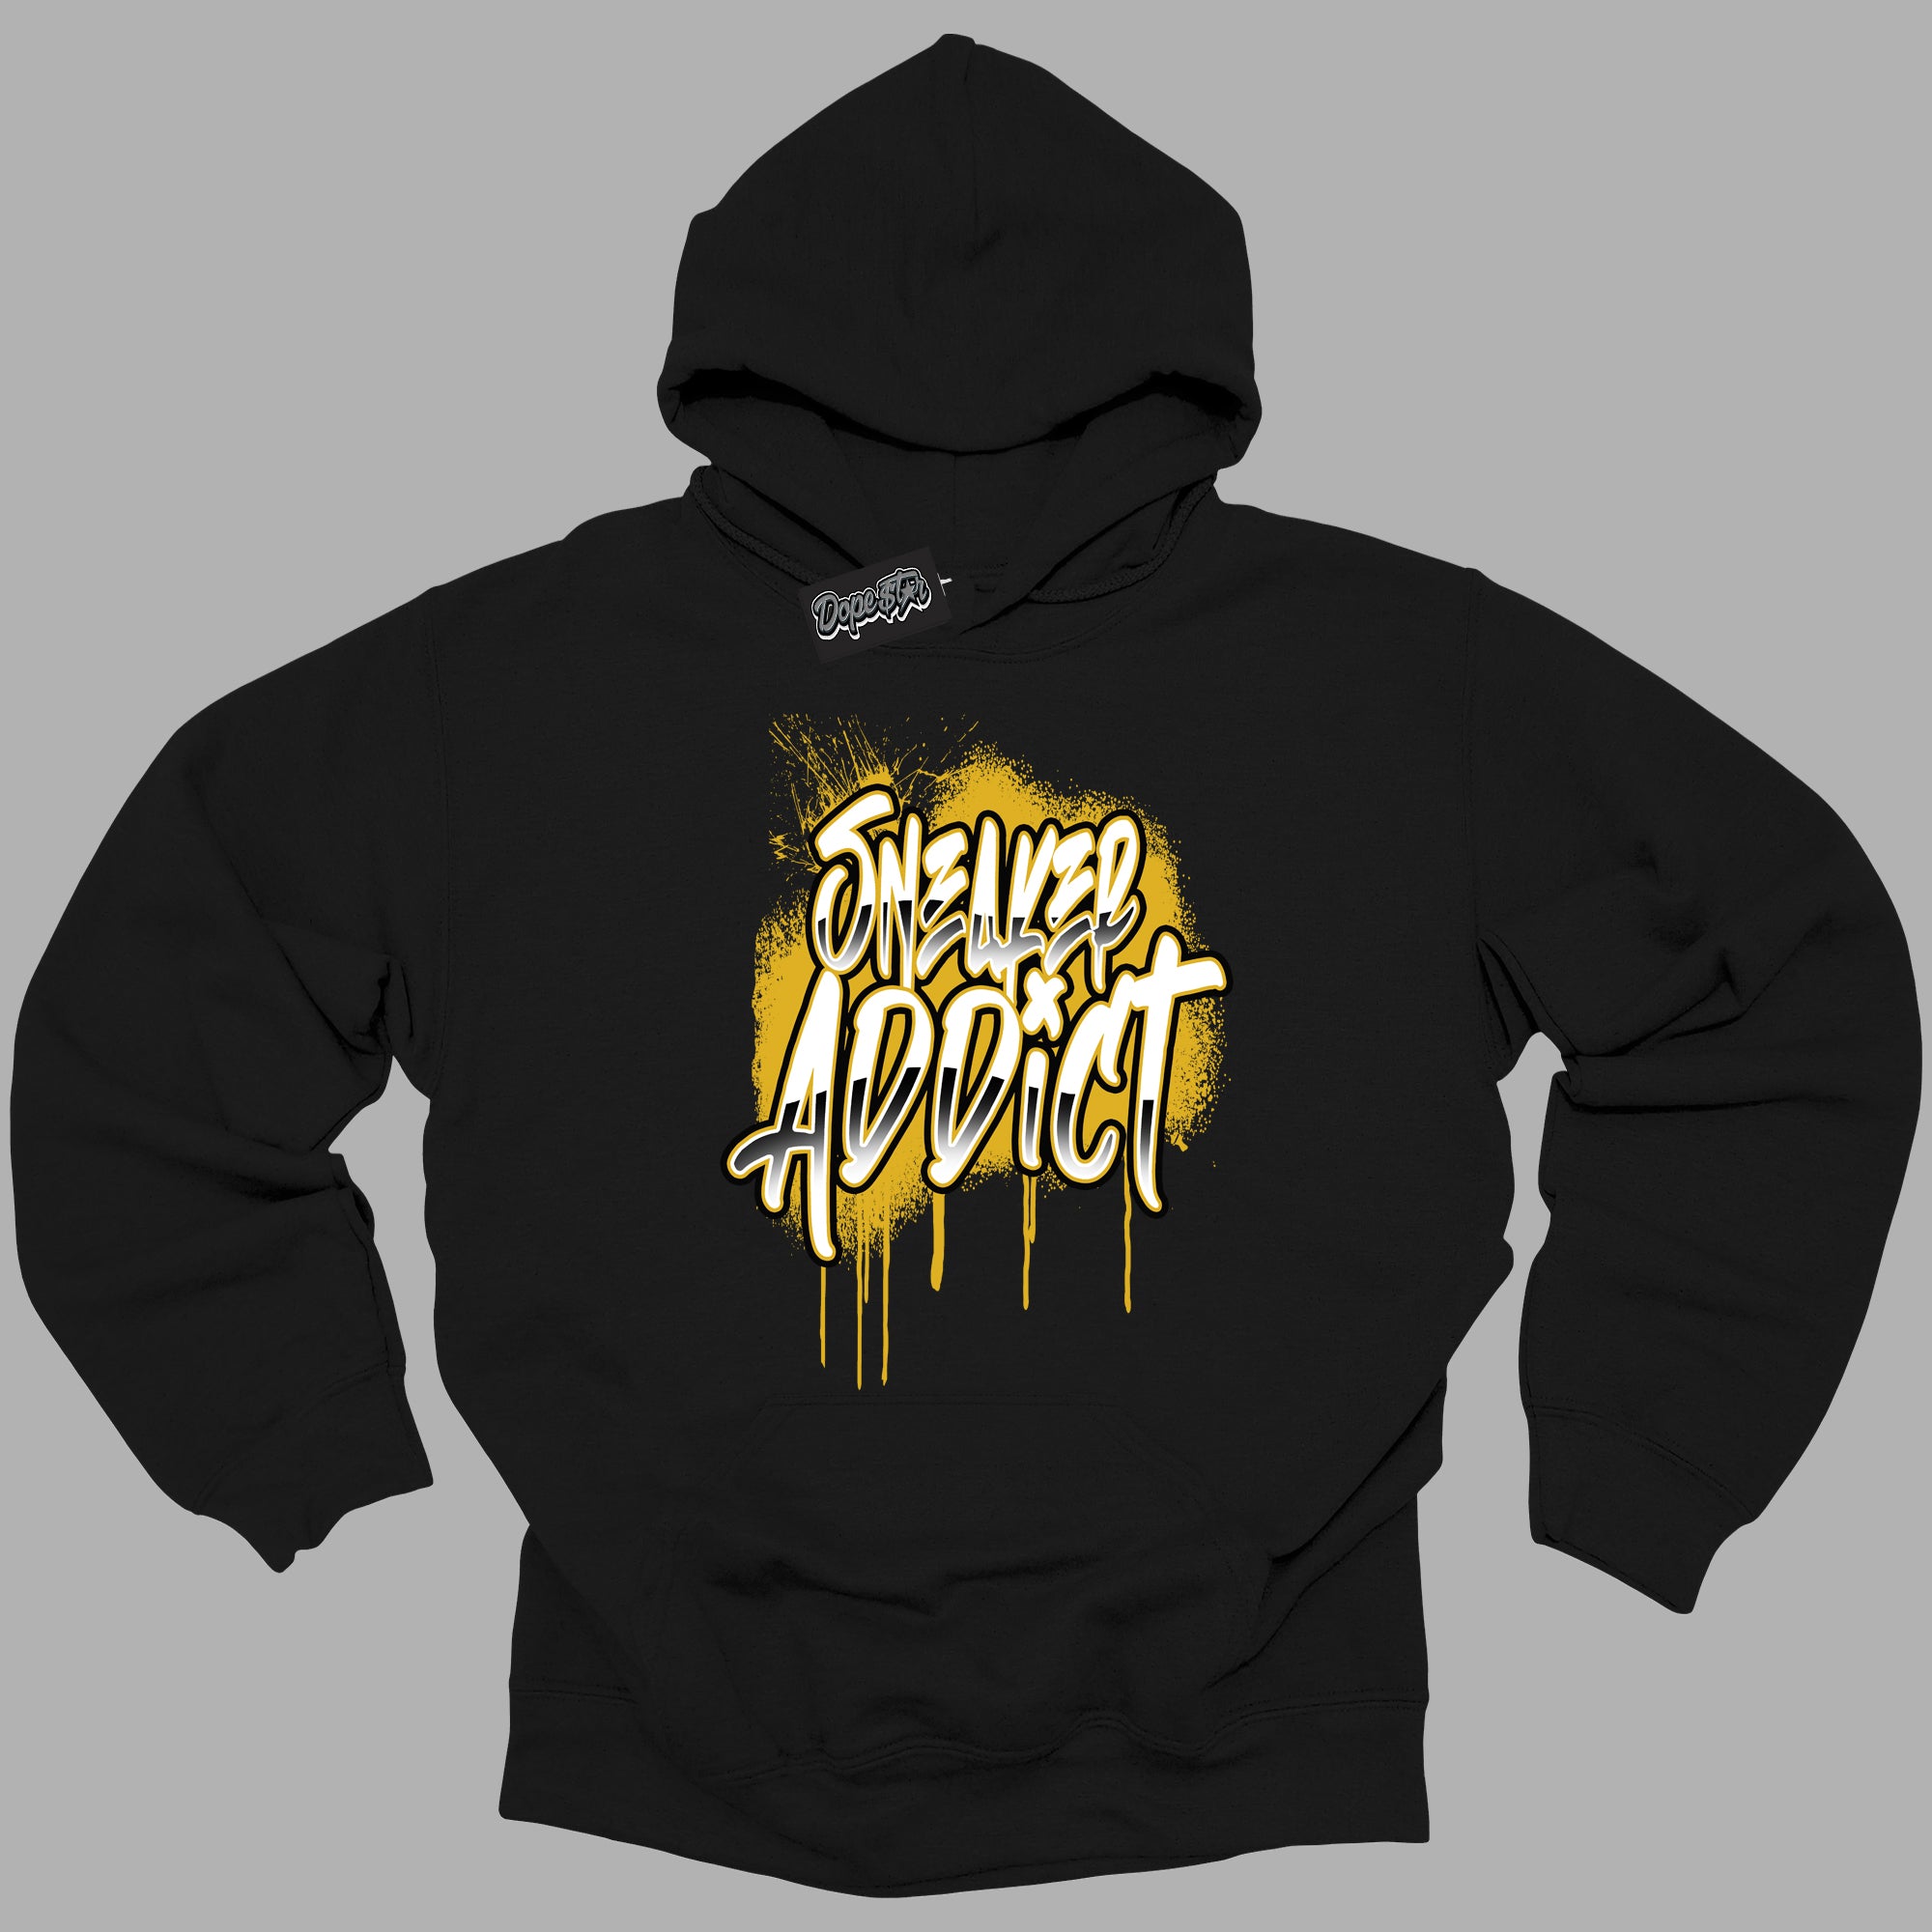 Cool Black Hoodie with “ Sneaker Addict ”  design that Perfectly Matches Yellow Ochre 6s Sneakers.